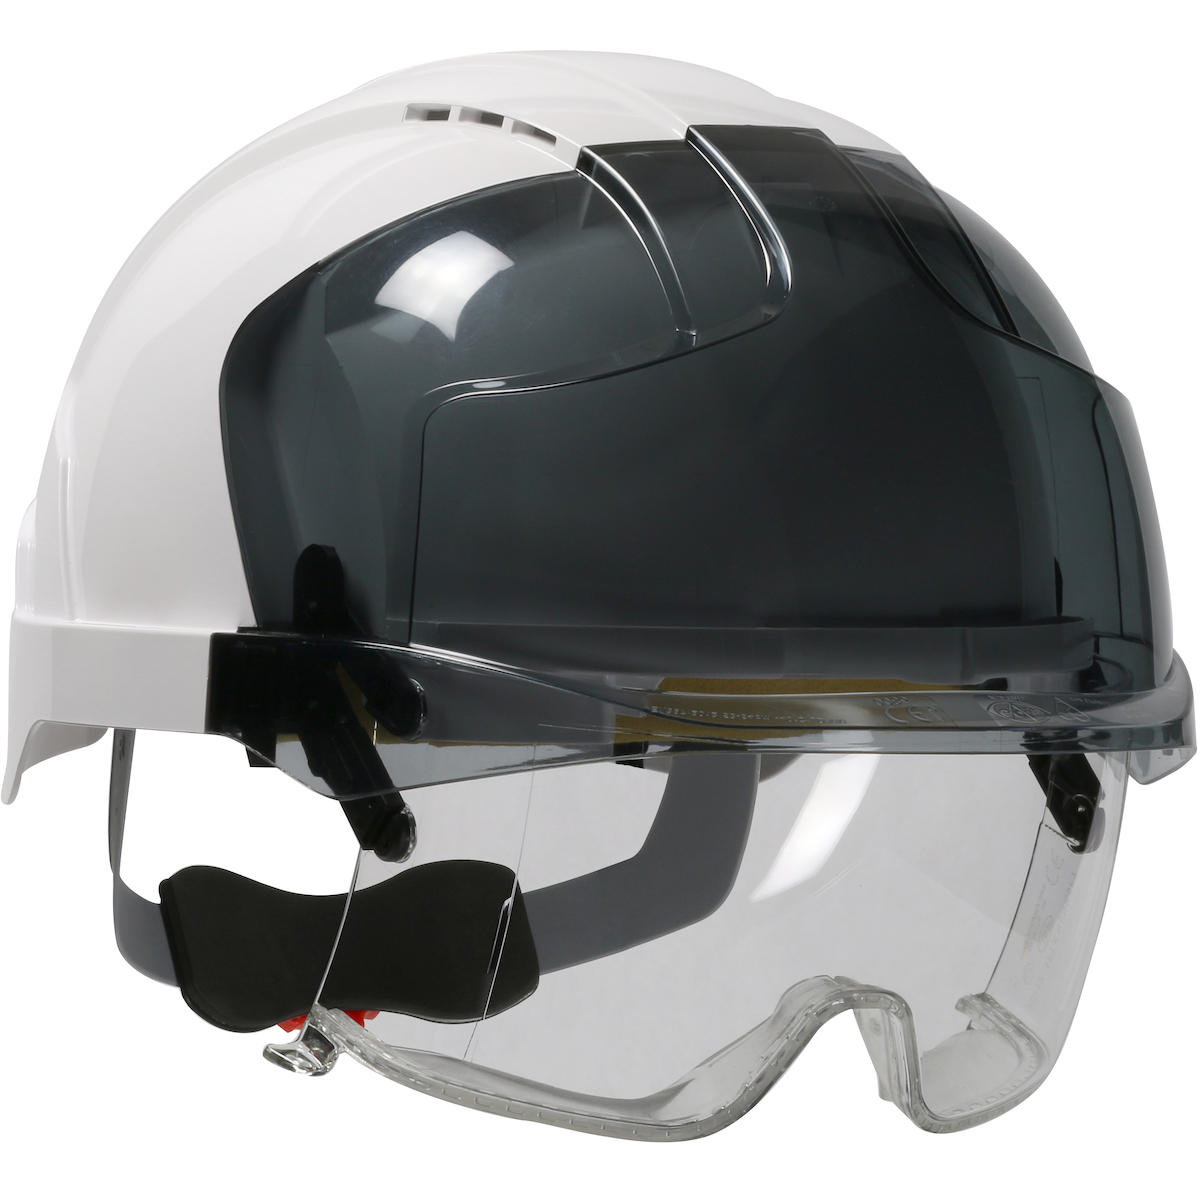 TYPE I, VENTED INDUSTRIAL SAFETY HELMET WITH LIGHTWEIGHT ABS SHELL, INTEGRATED ANSI Z87.1 EYE PROTECTION, 6-POINT POLYESTER SUSPENSION AND WHEEL RATCHET ADJUSTMENT